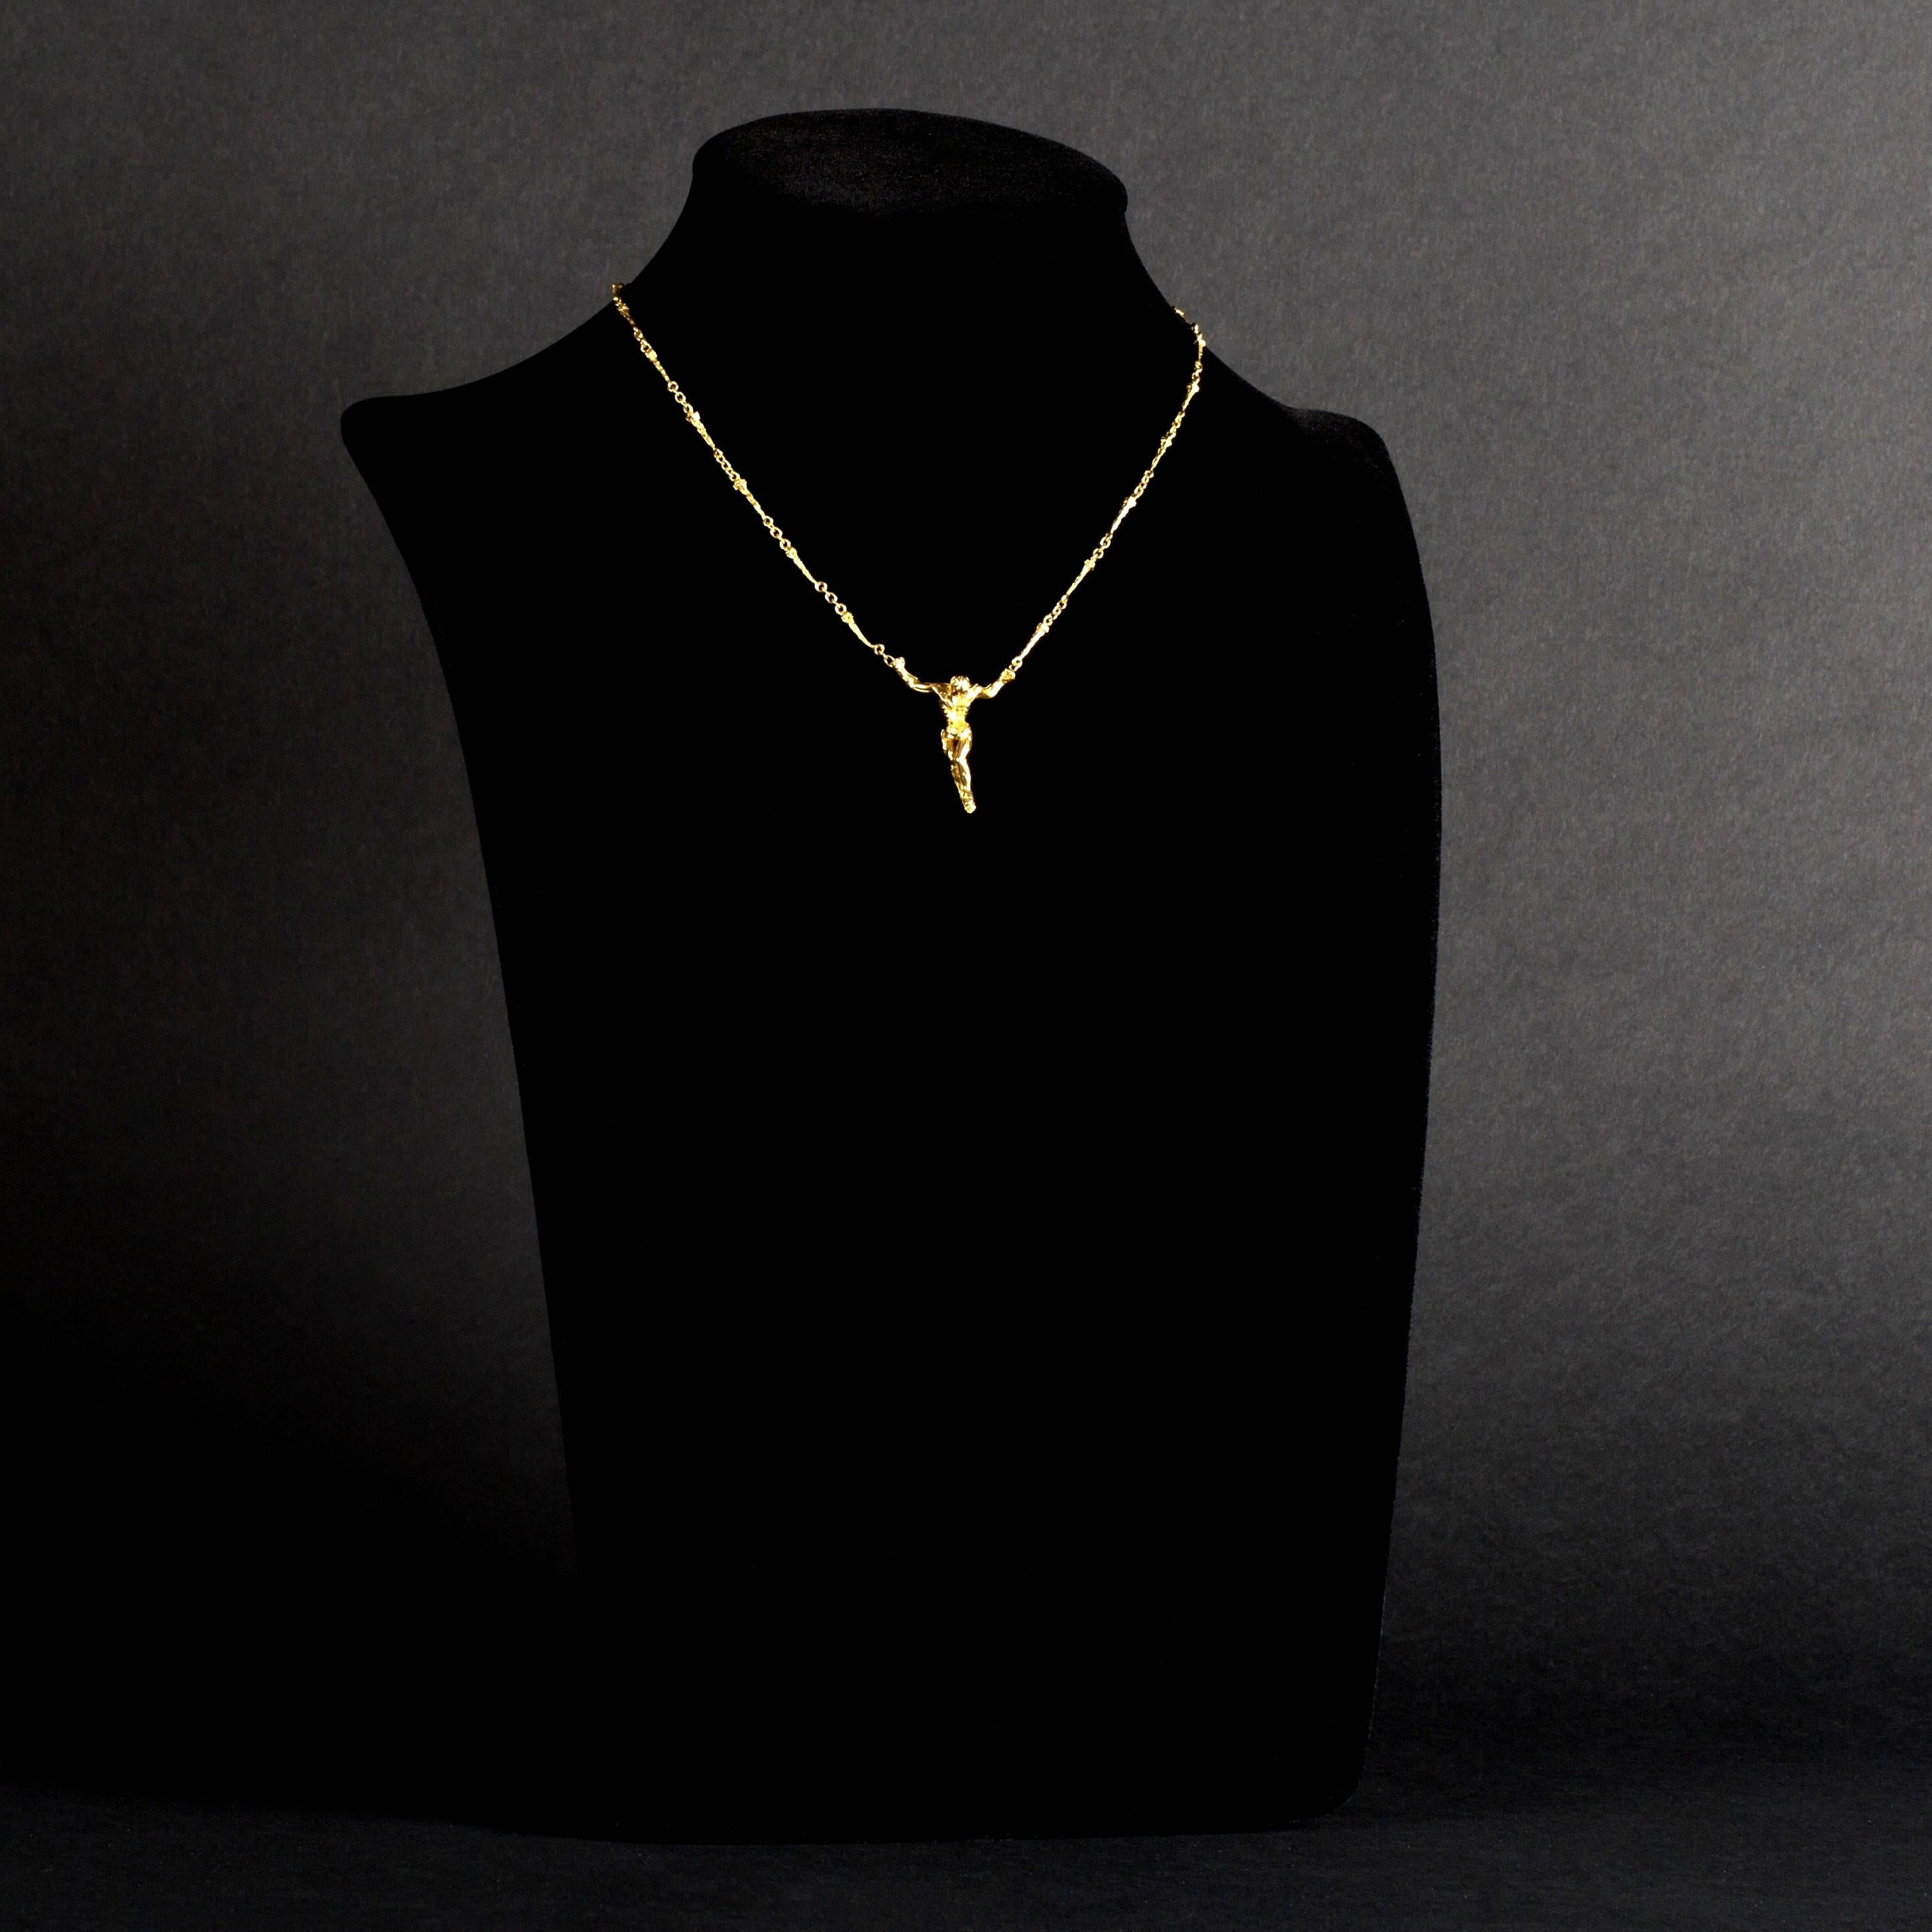 Salvador Dali - Christ - Signed Gold Necklace
18k yellow-gold original Necklace - signed - edition of 1000 
1970 
This exclusive necklace is a creation by the hands of famous artist Salvador Dali. The necklace is a symbol from one of his paintings.